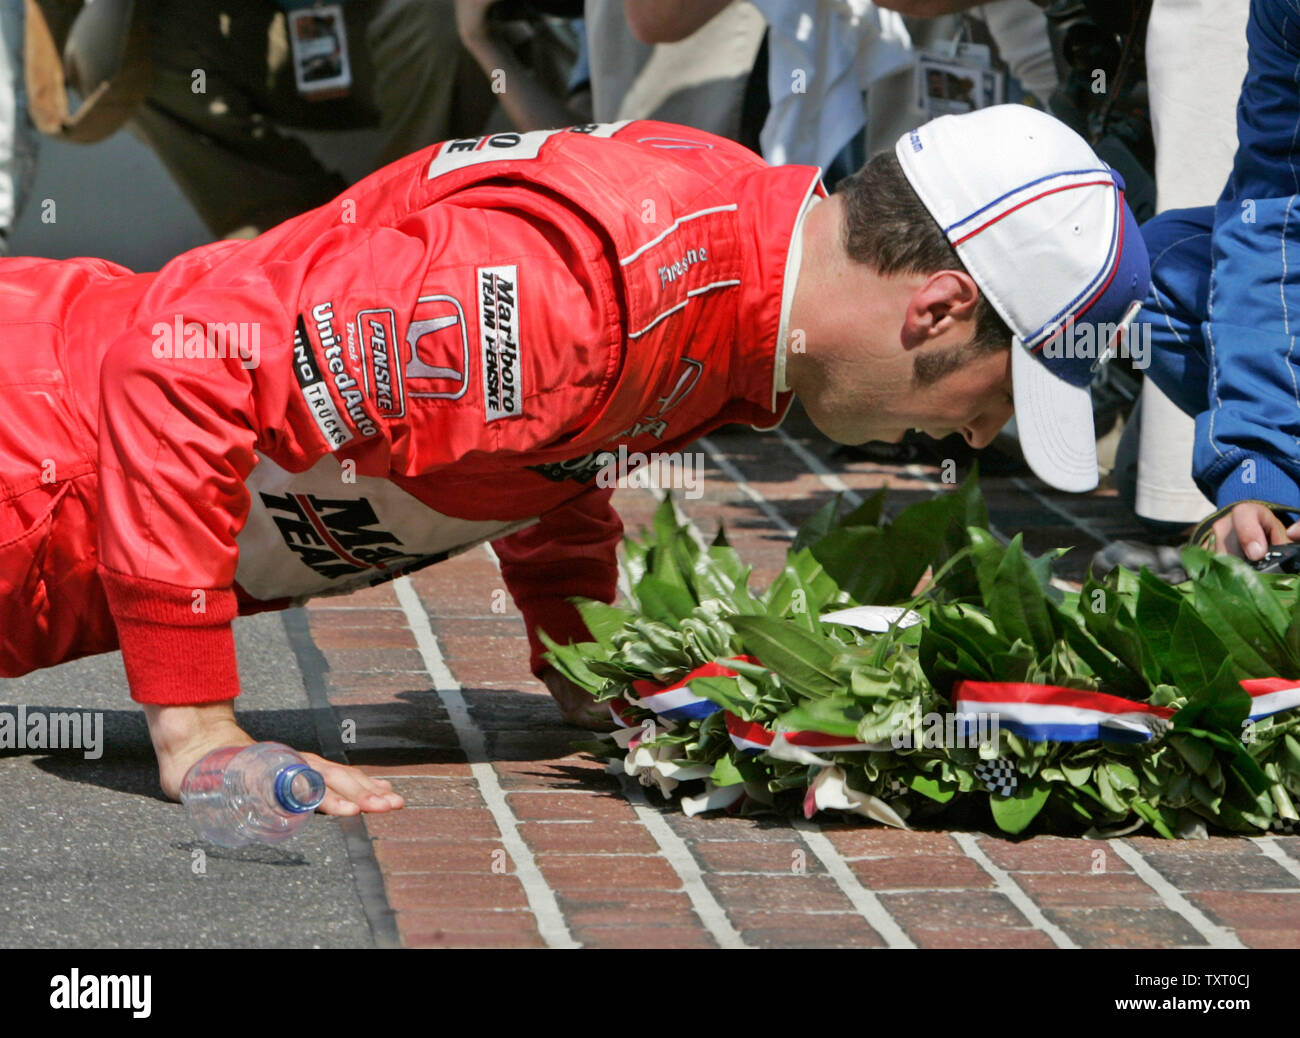 Sam Hornish Jr. kisses the yard of bricks at the finish line after winning the 90th running of the Indianapolis 500 on May 28, 2006 in Indianapolis, IN. Hornish edged out Marco Andretti in the second closest Indy 500 finish. (UPI Photo/Brian Kersey) Stock Photo